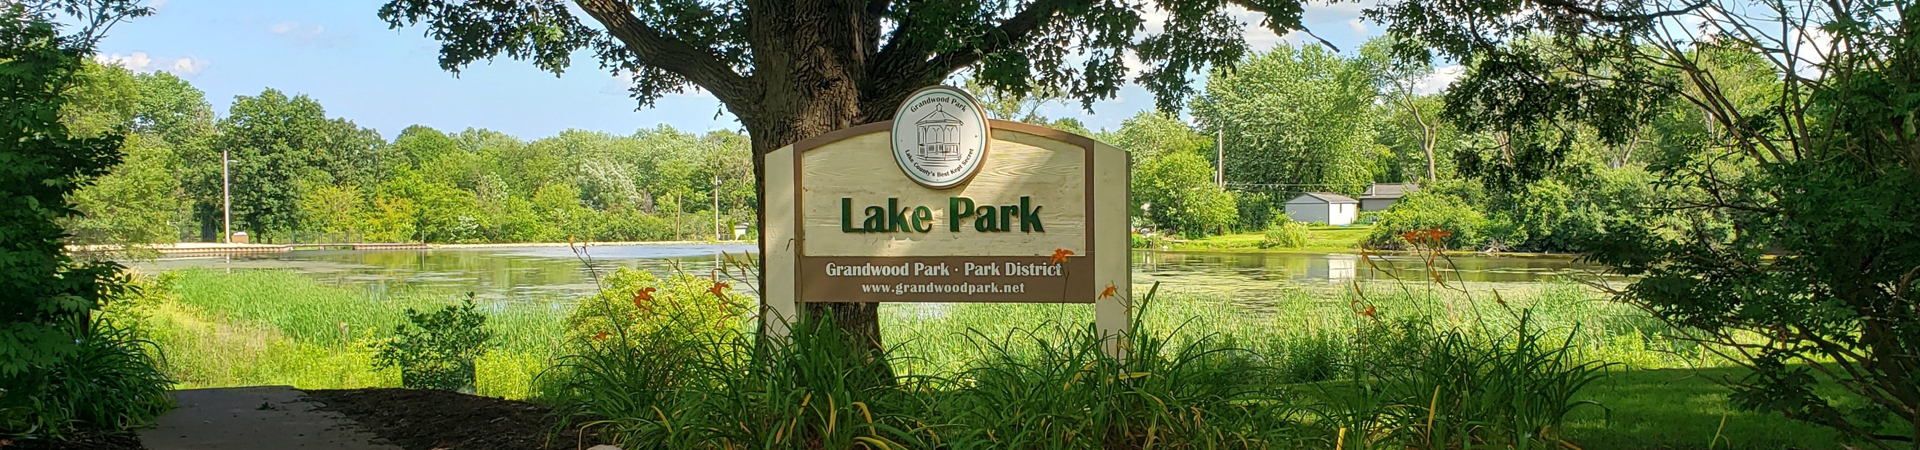 Sign showing name of Lake Park in front of native grasses and pond in summer